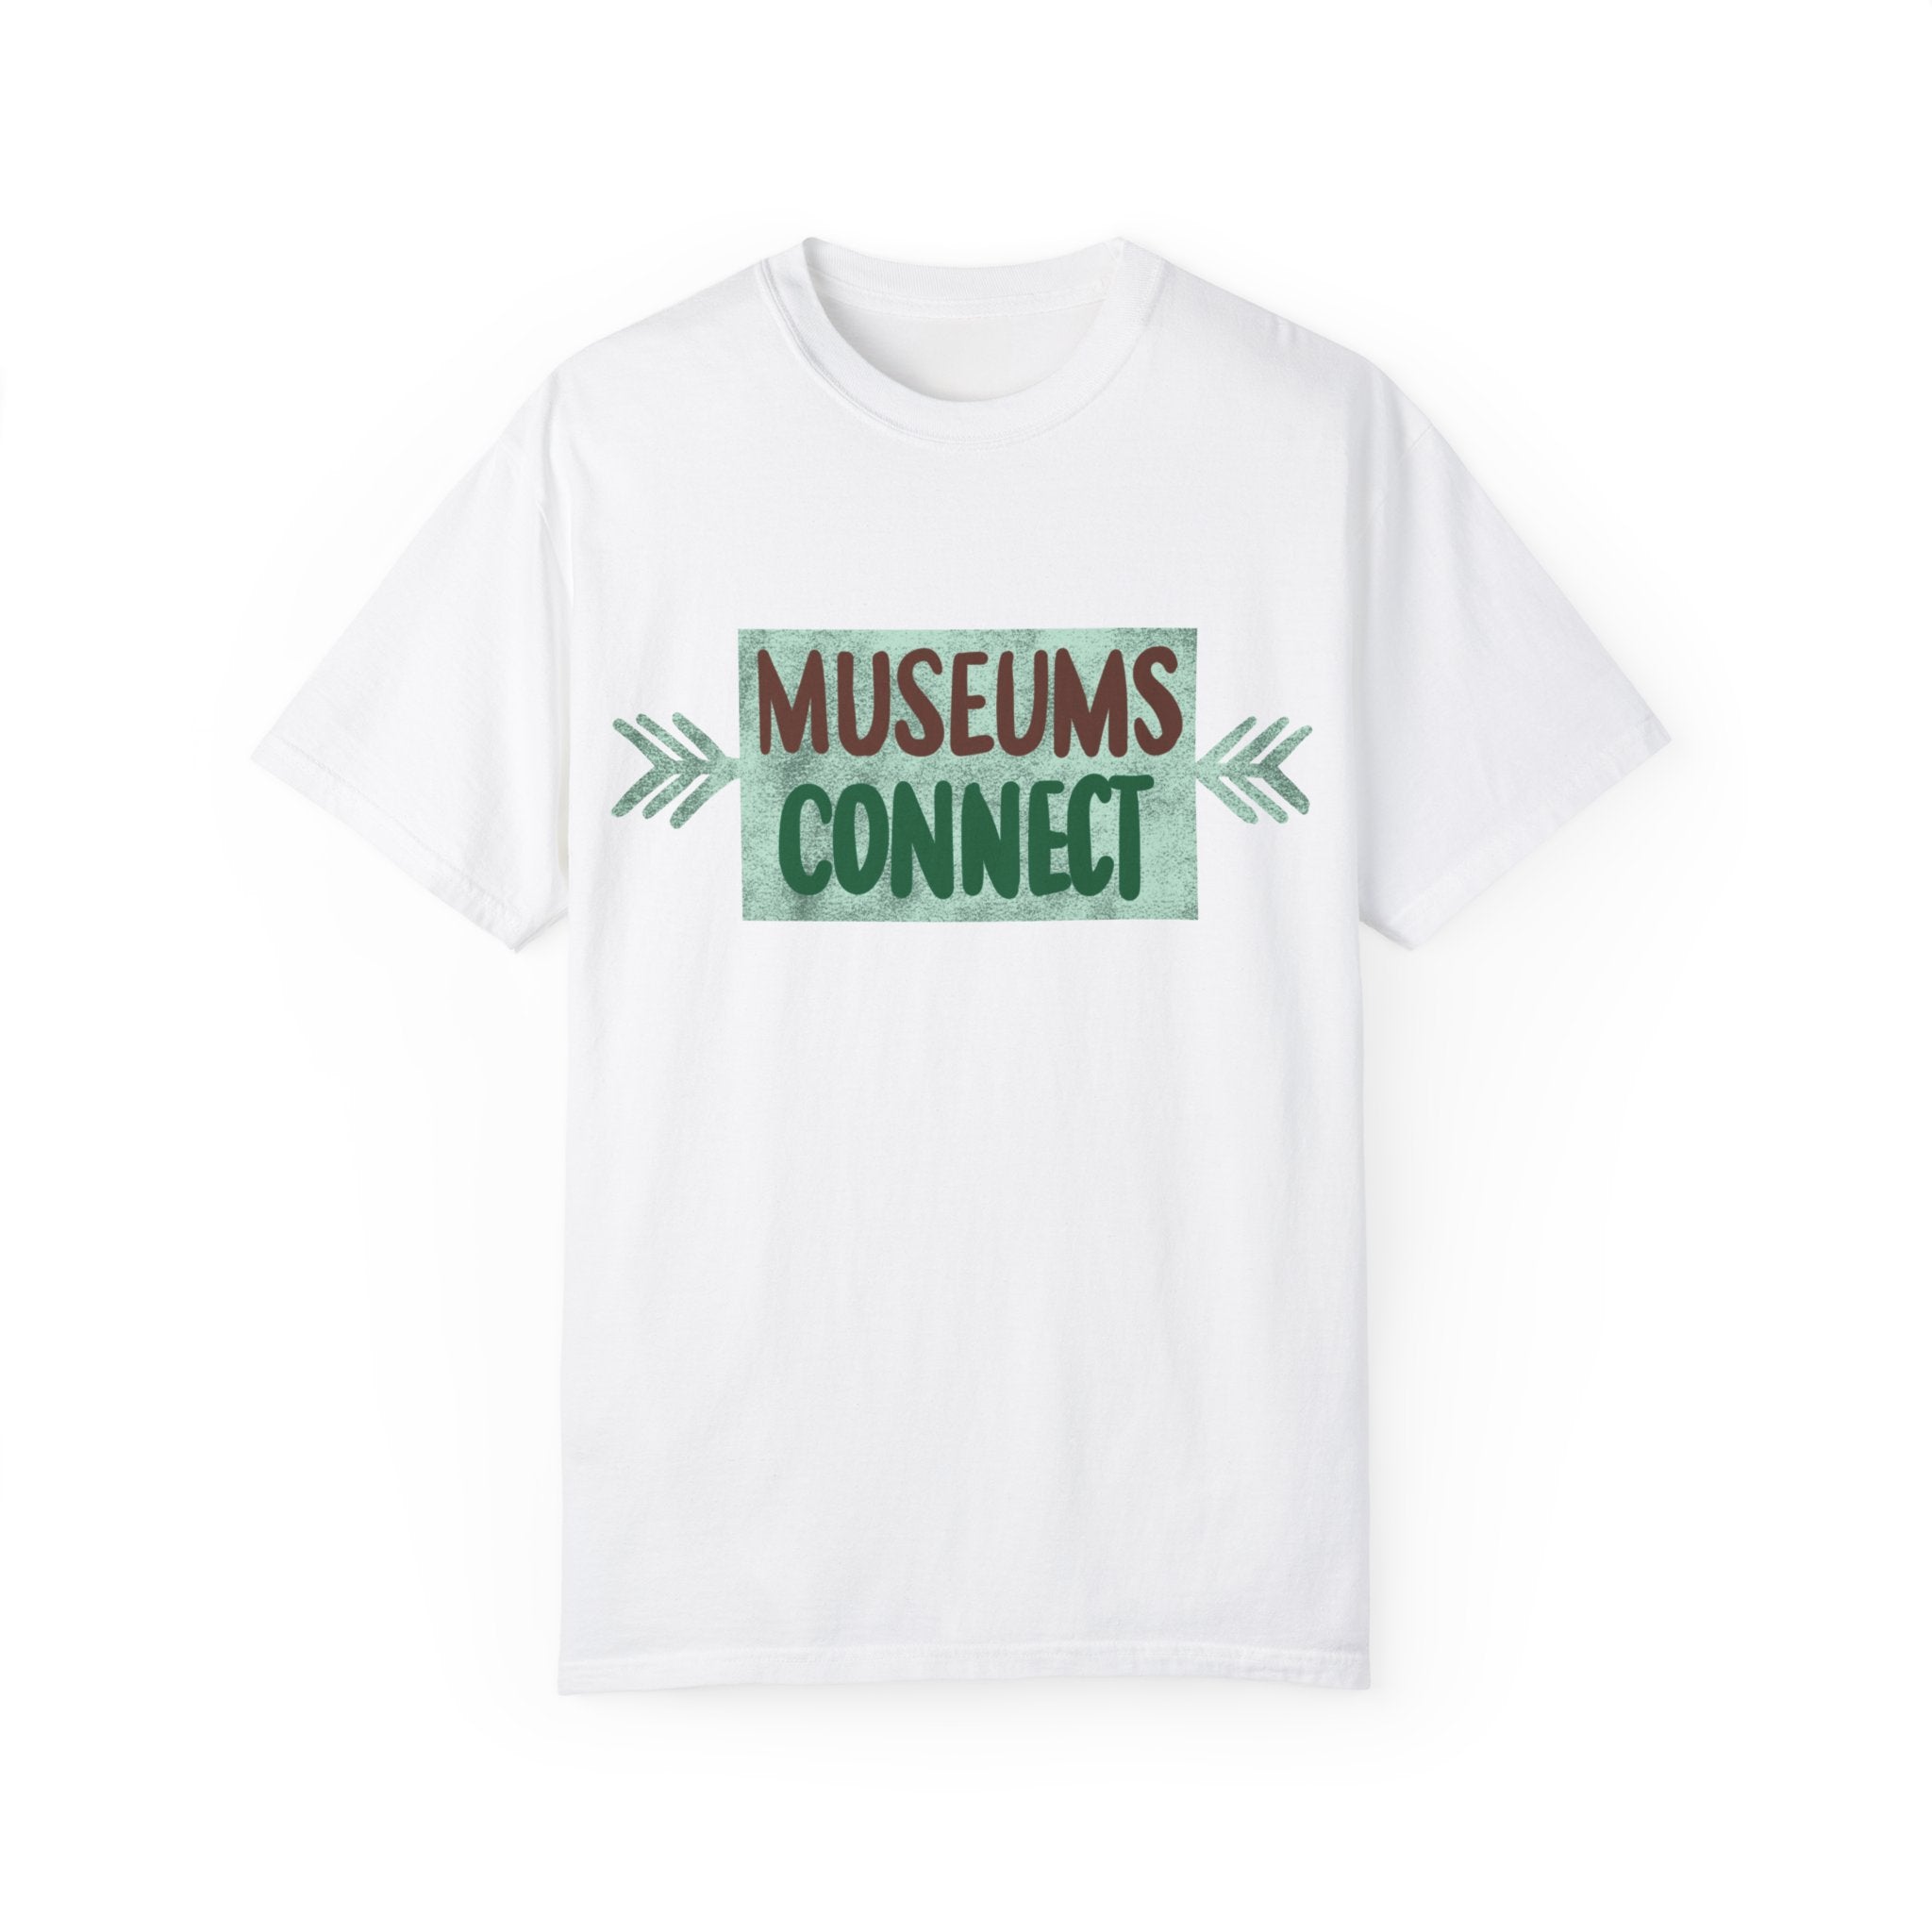 MUSEUMS CONNECT Unisex Garment-Dyed T-shirt